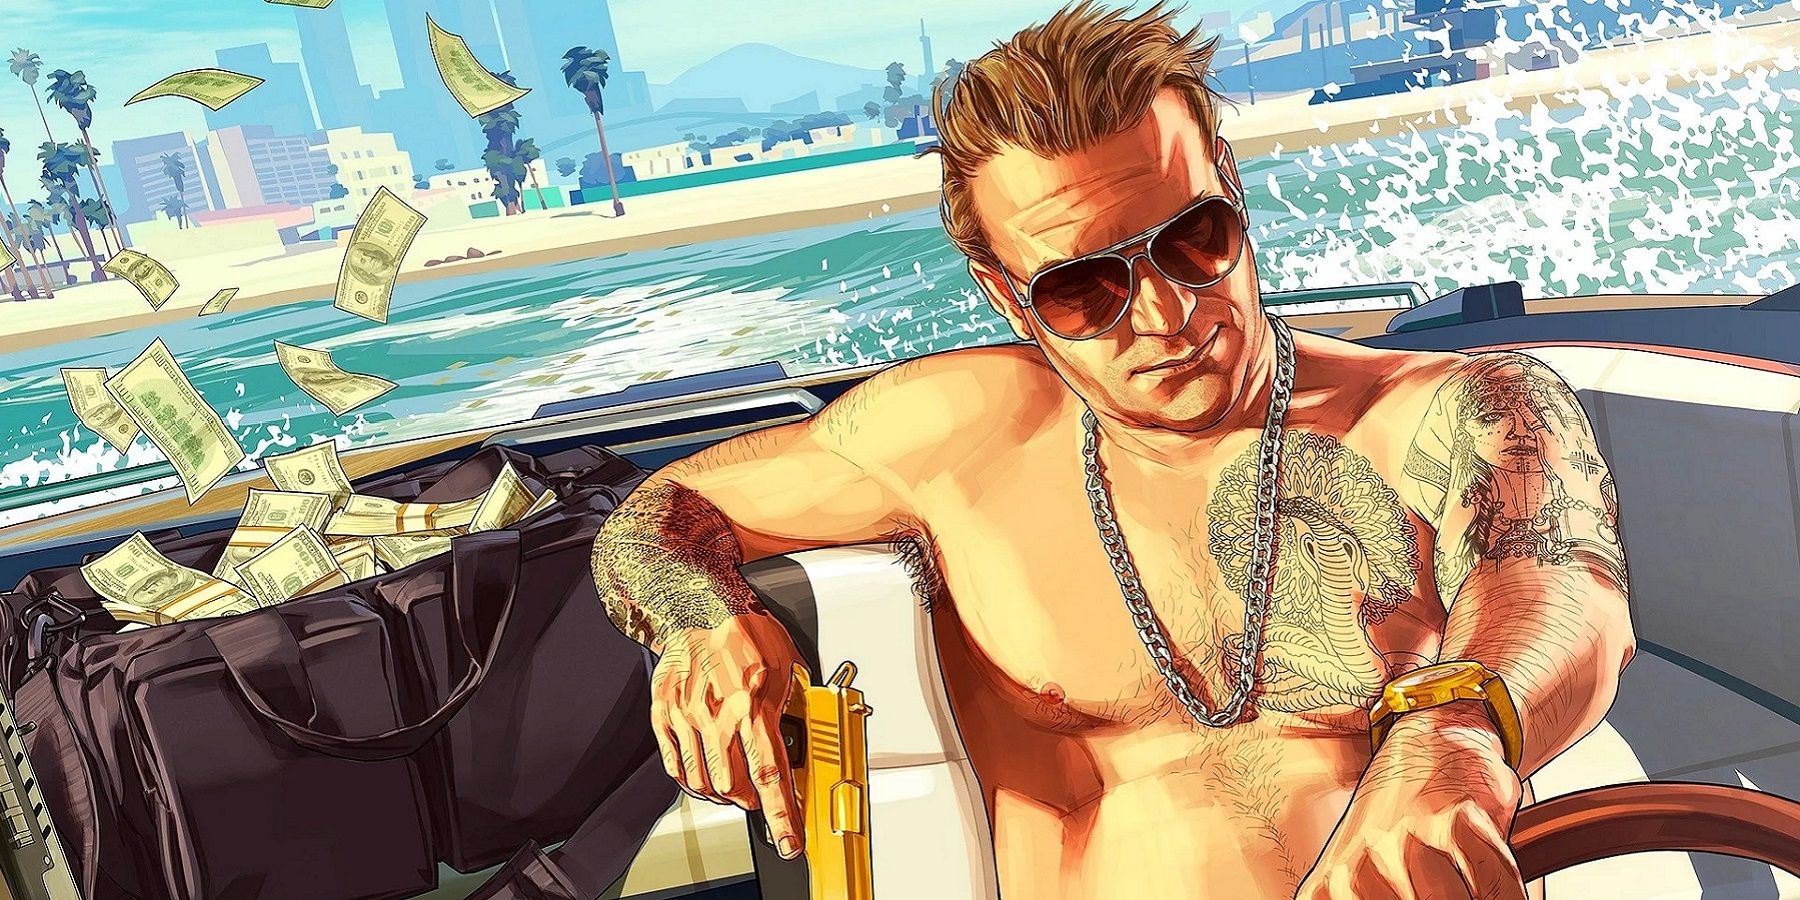 Image from GTA 5 showing a shirtless man riding away in a boat carrying a bag of money.